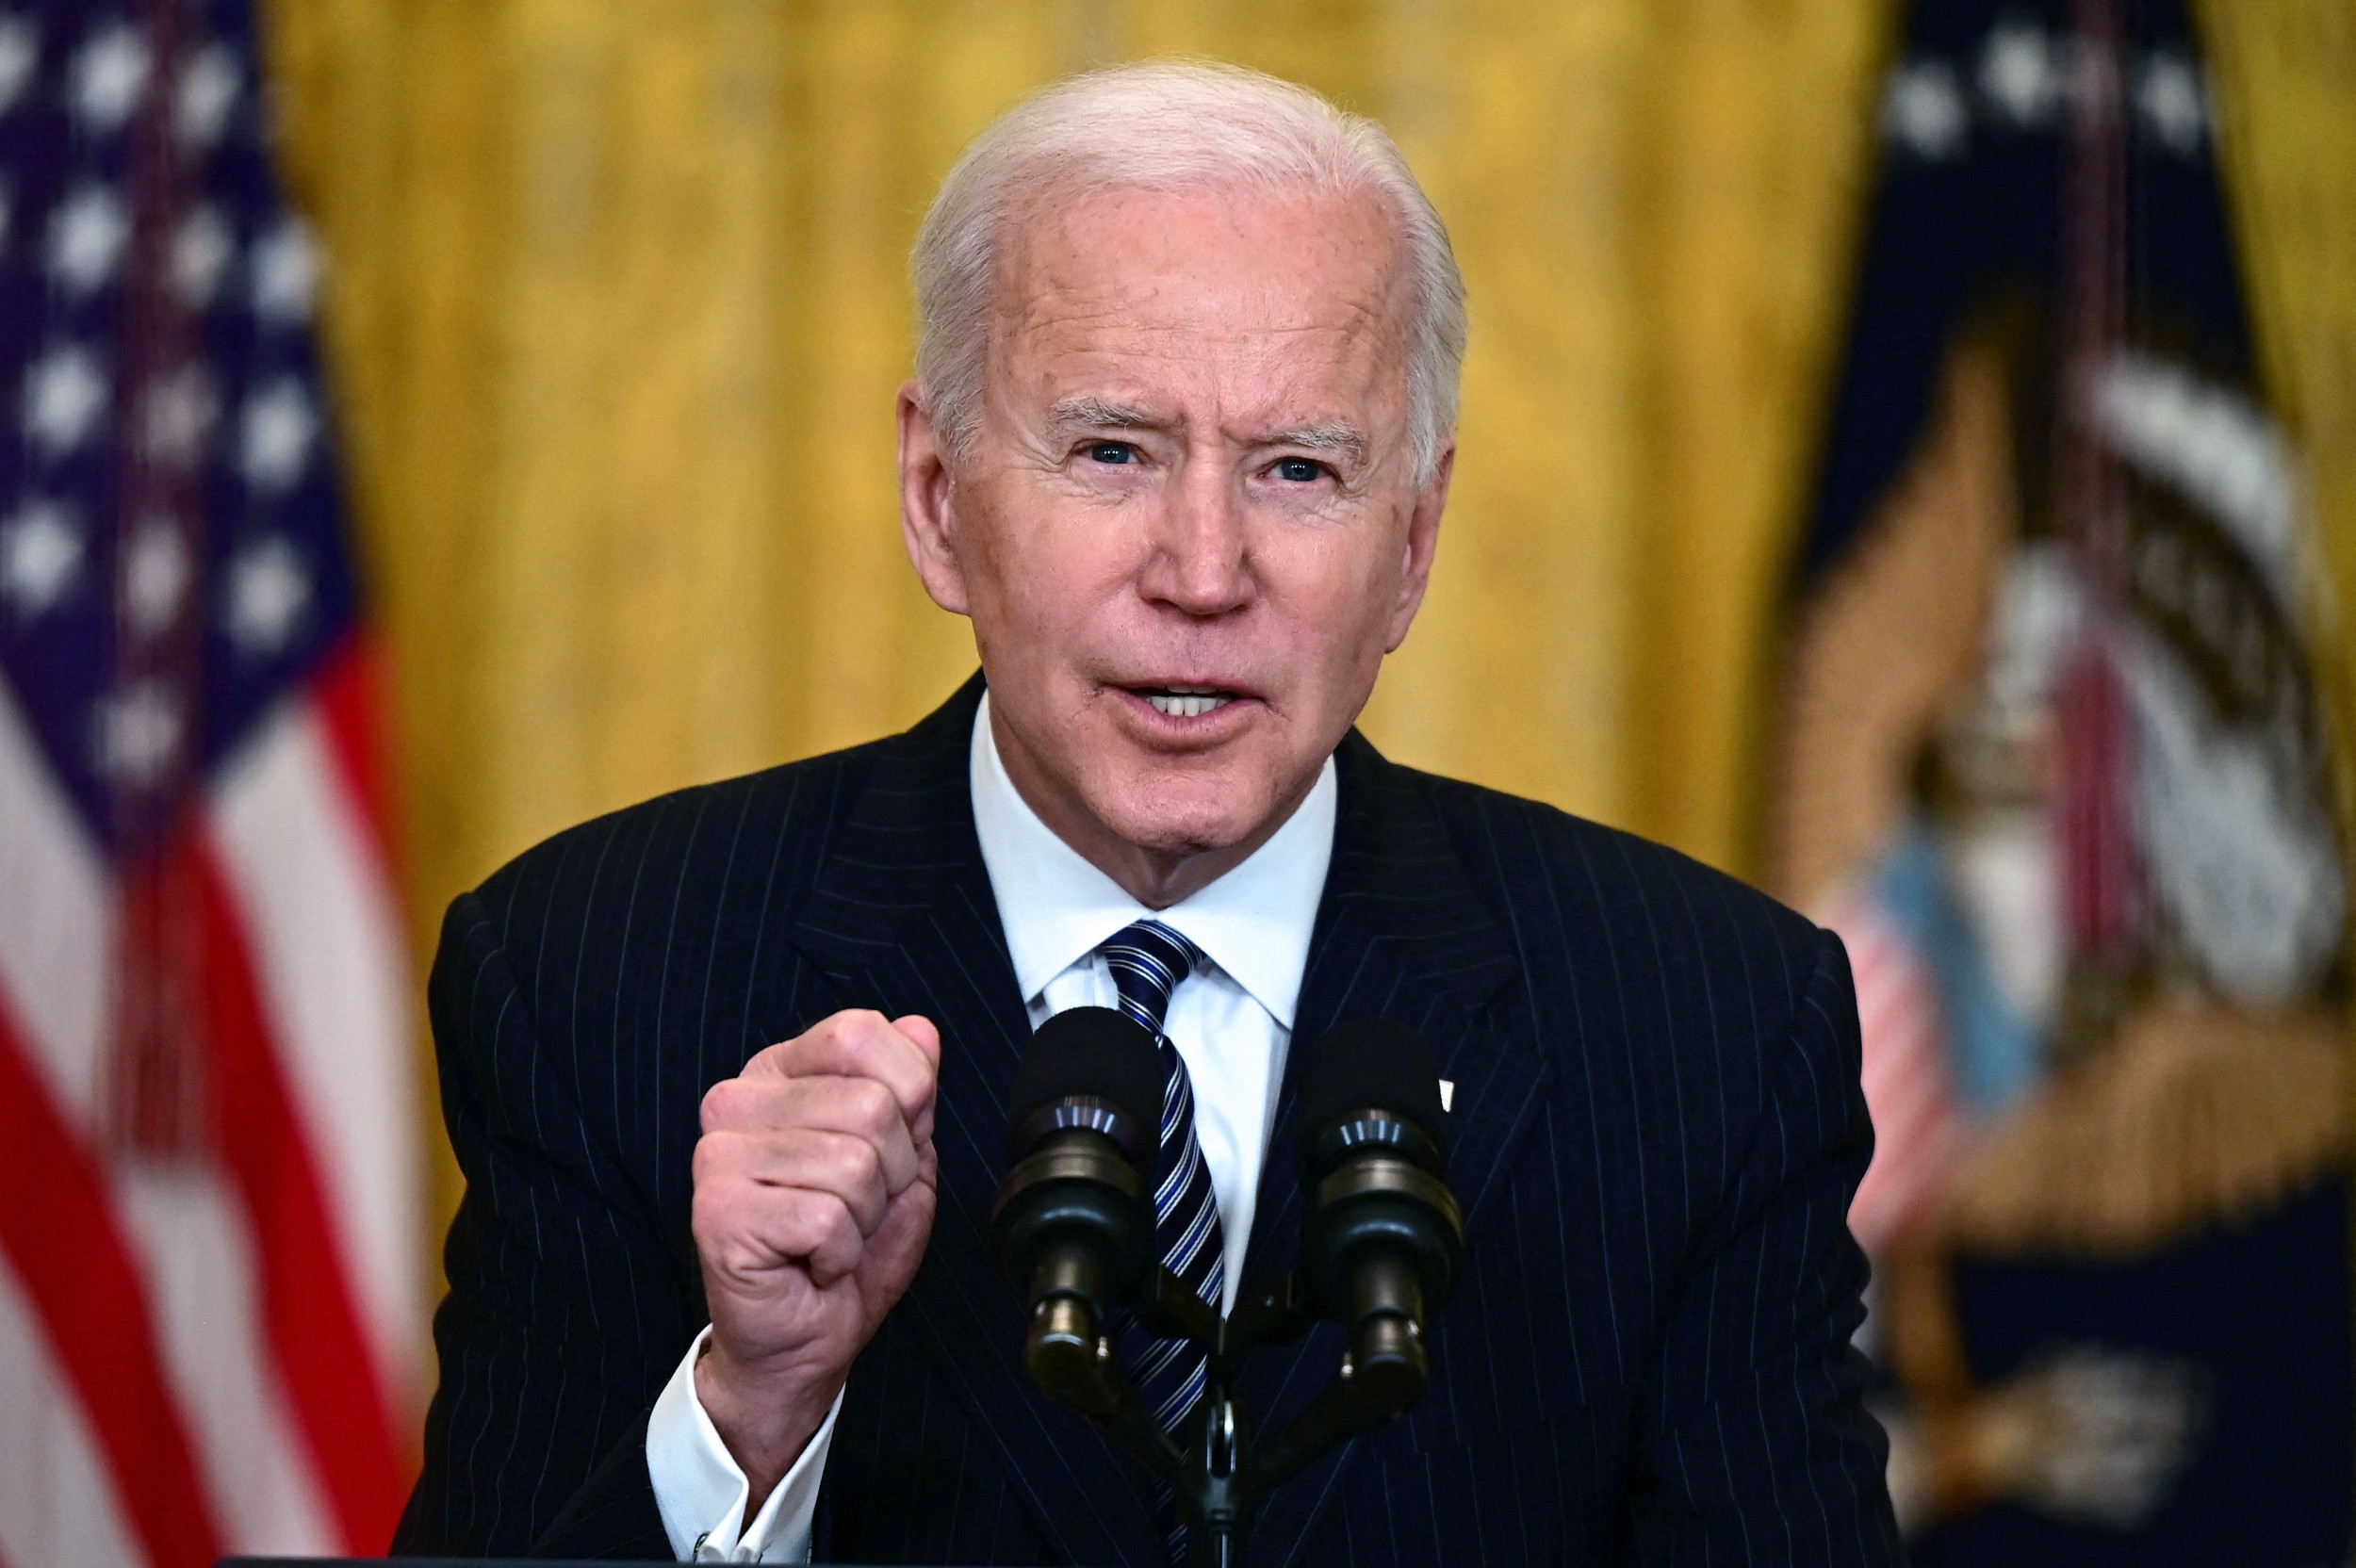 Joe Biden’s approval rating shows divided nation beyond simple party lines